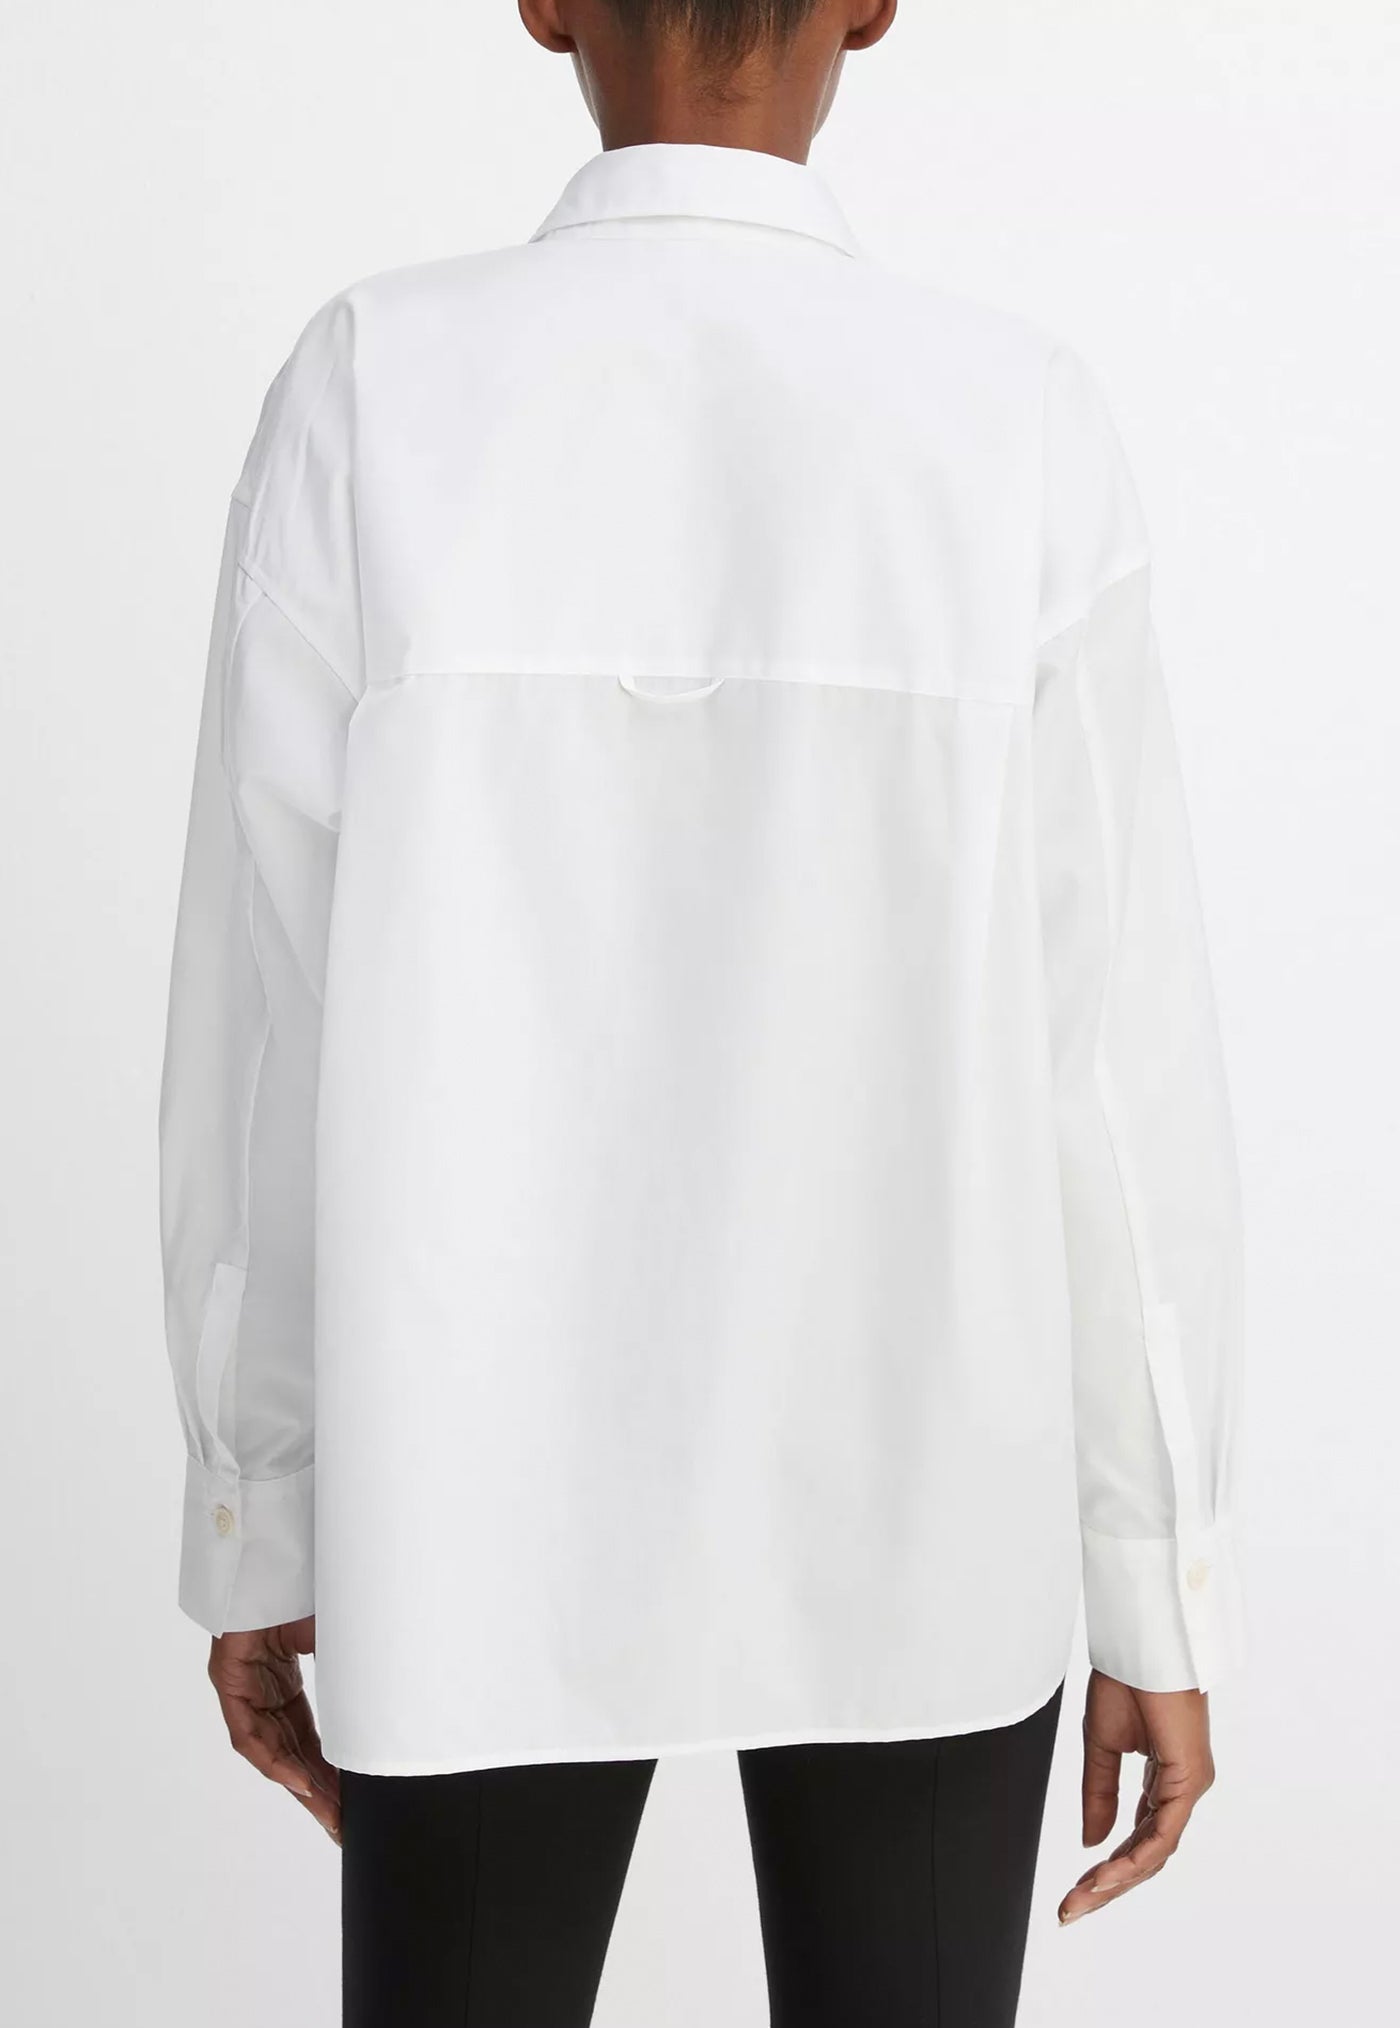 Convertible Button Down Shirt - White sold by Angel Divine